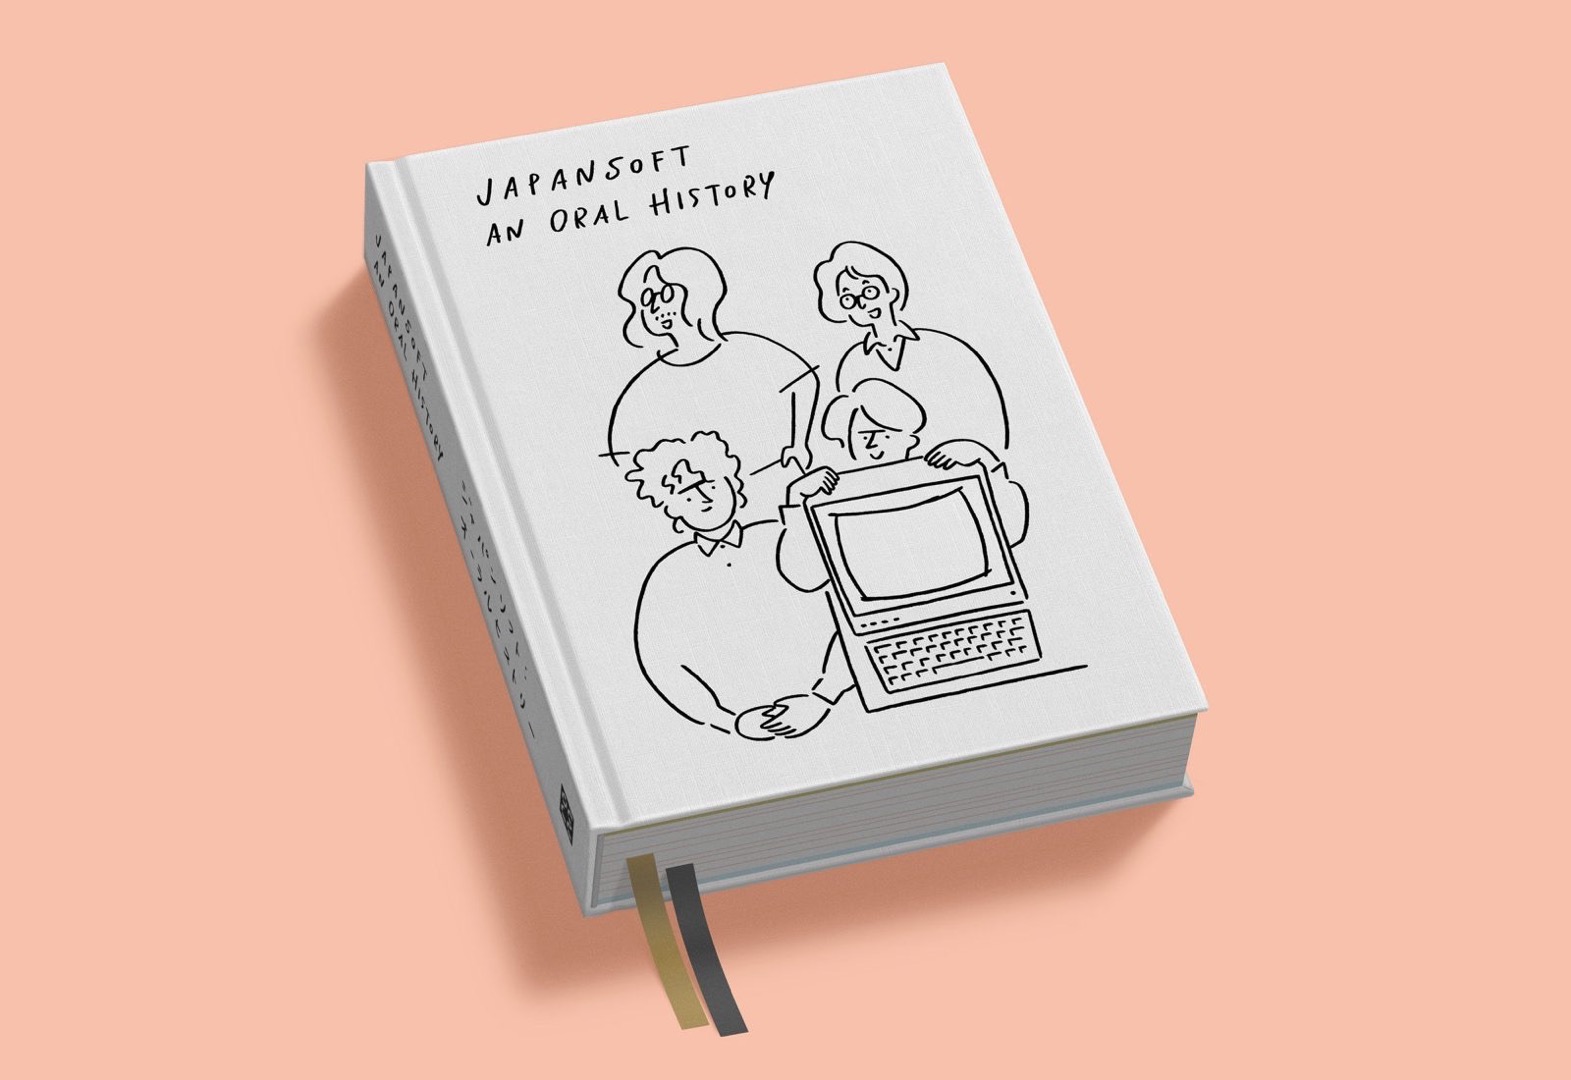 A picture of the book Japansoft: An Oral History against a soft pink background